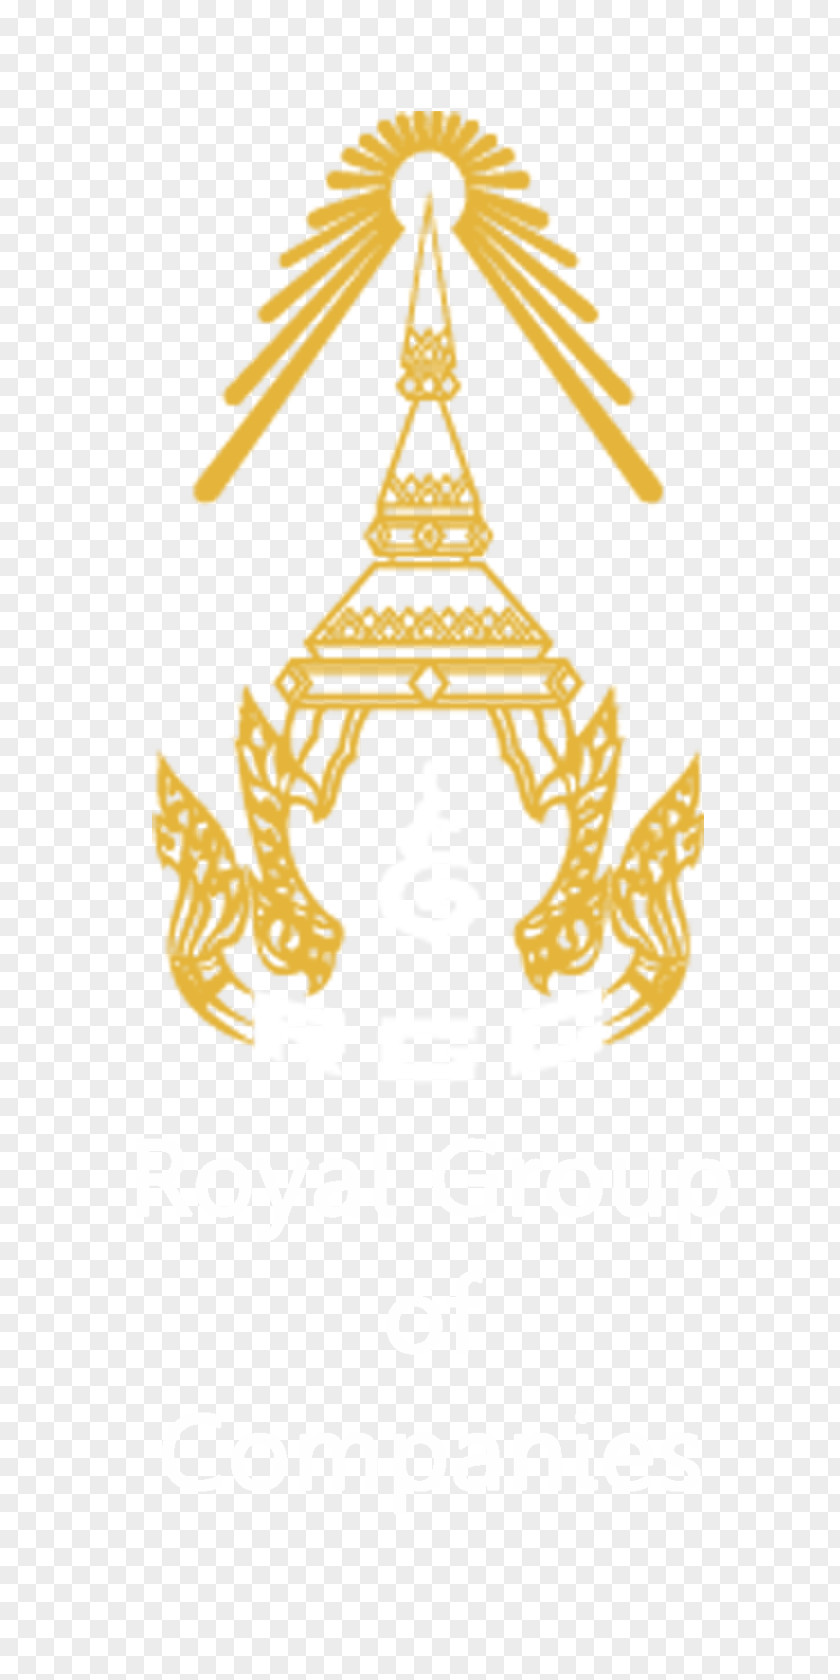 Cambodia The Royal Group Company Logo Conglomerate PNG